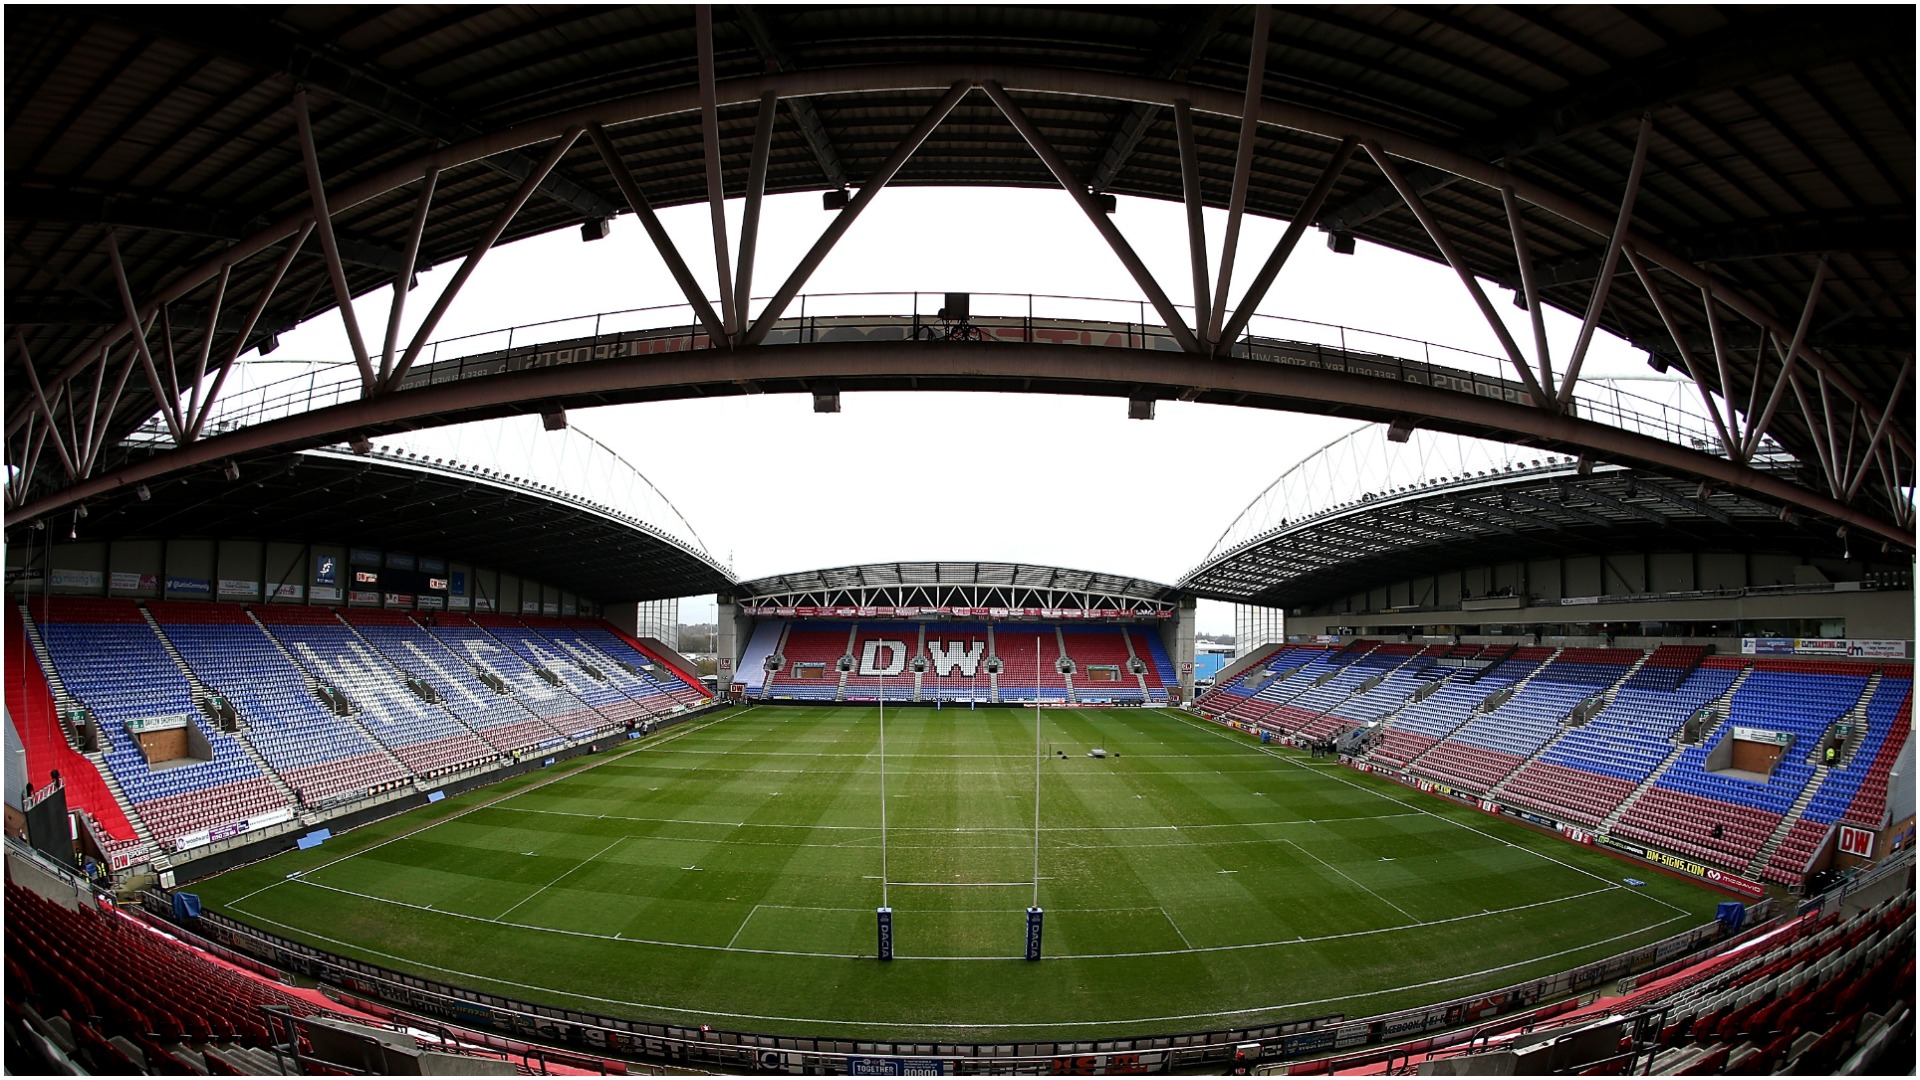 Wigan Athletic face an uncertain future after going into administration, but help could come from the town's rugby league club.